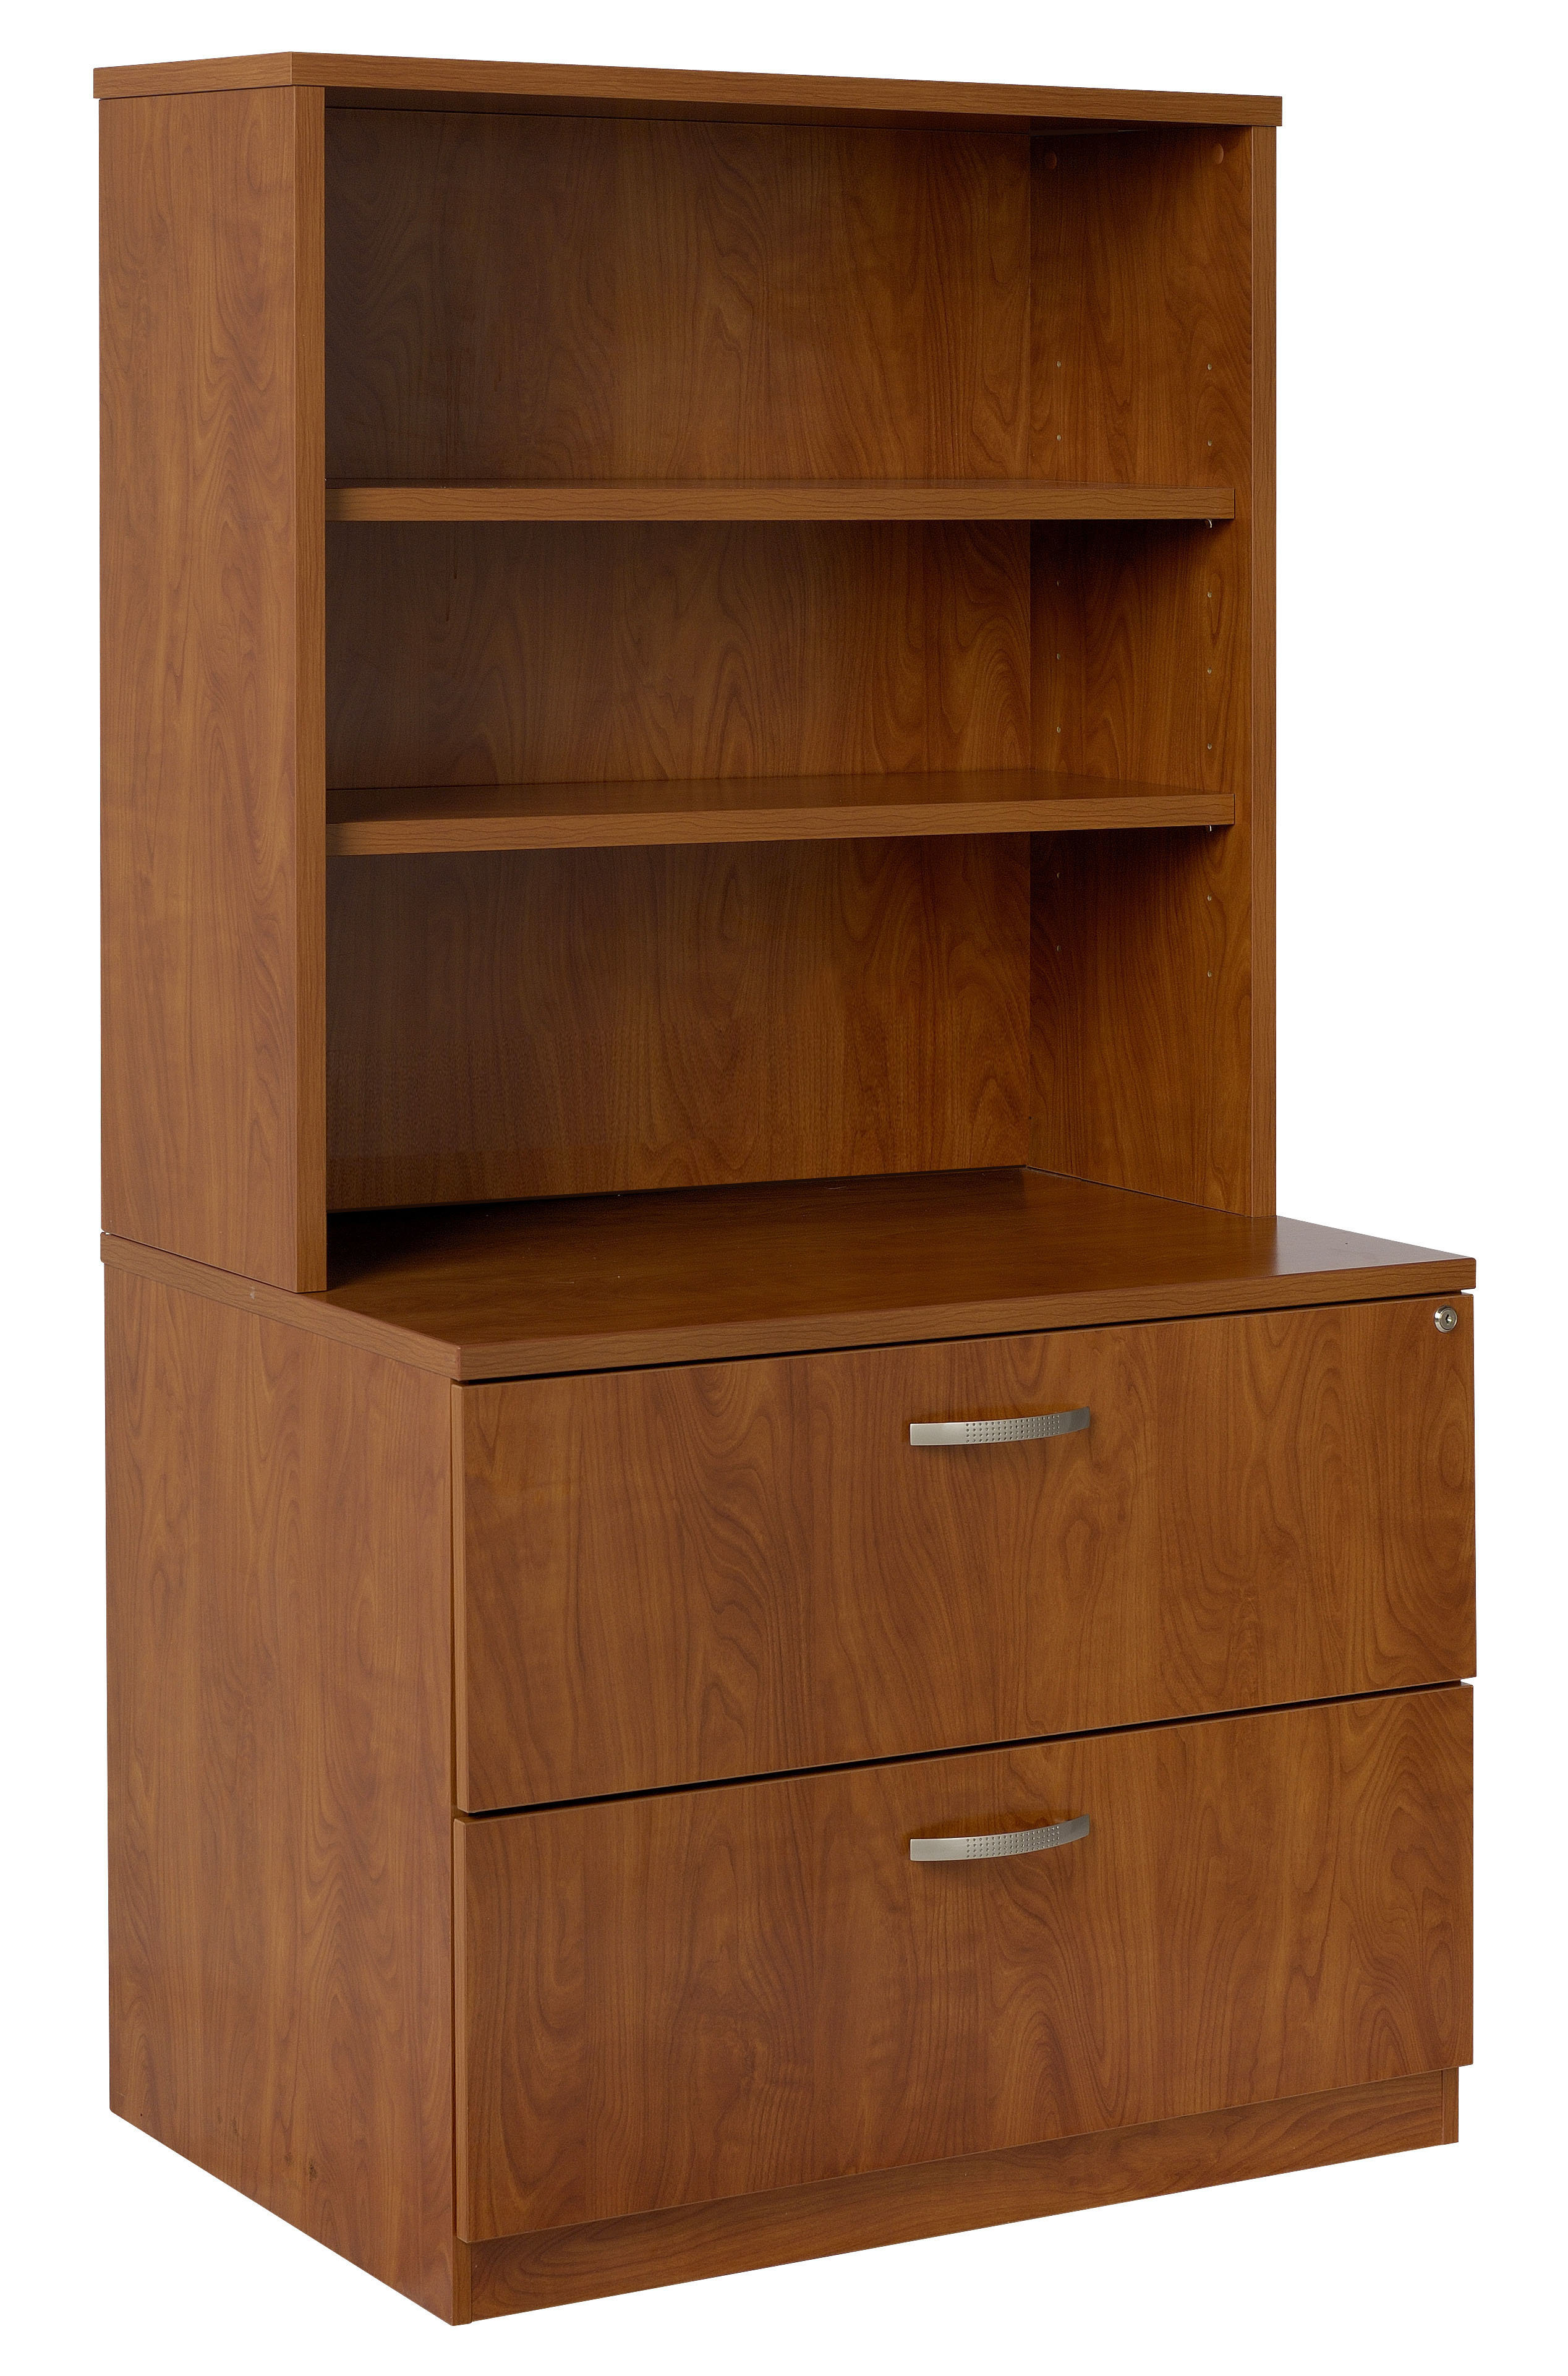 Trendway Lateral File Hutch 2 Drawer Vertical Filing Cabinet Wayfair in dimensions 2536 X 3842